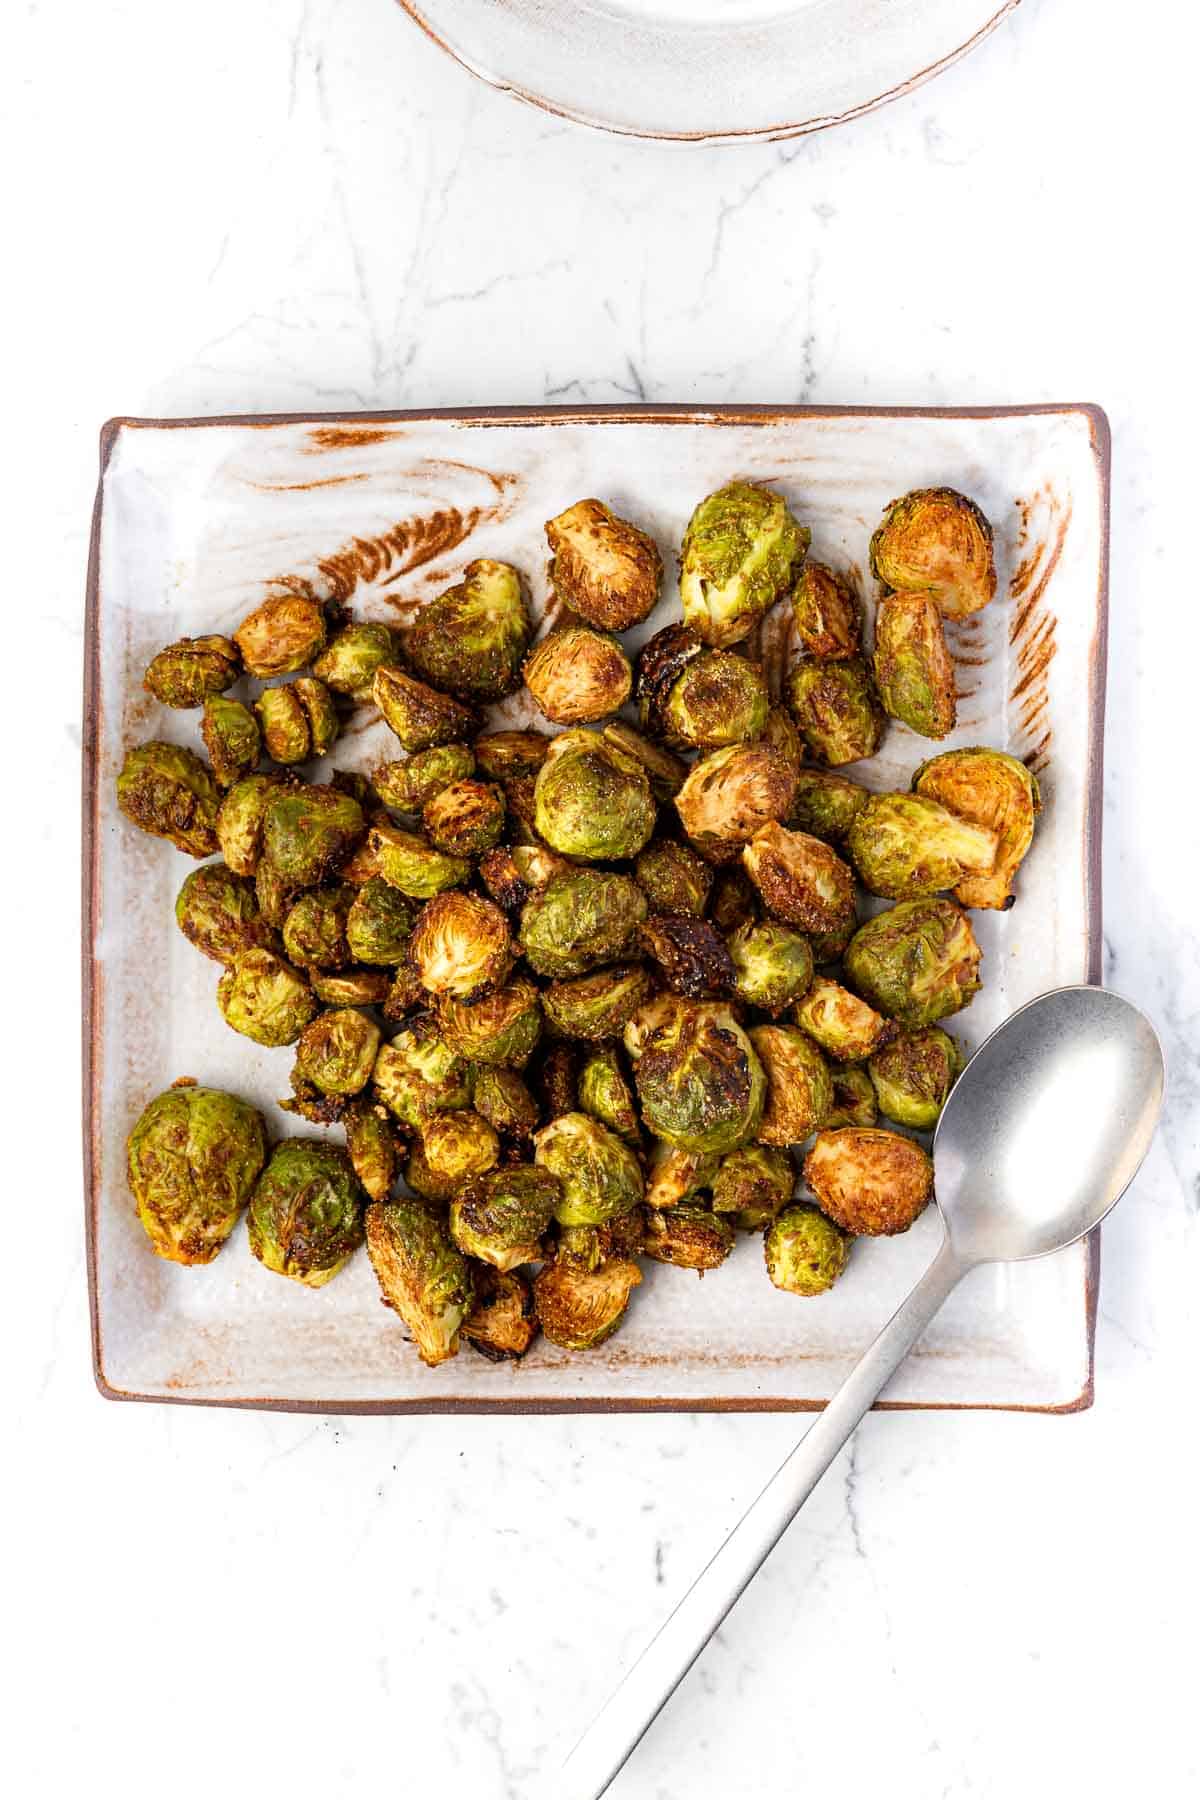 A plate of Maple Balsamic Roasted Vegan Brussels Sprouts.